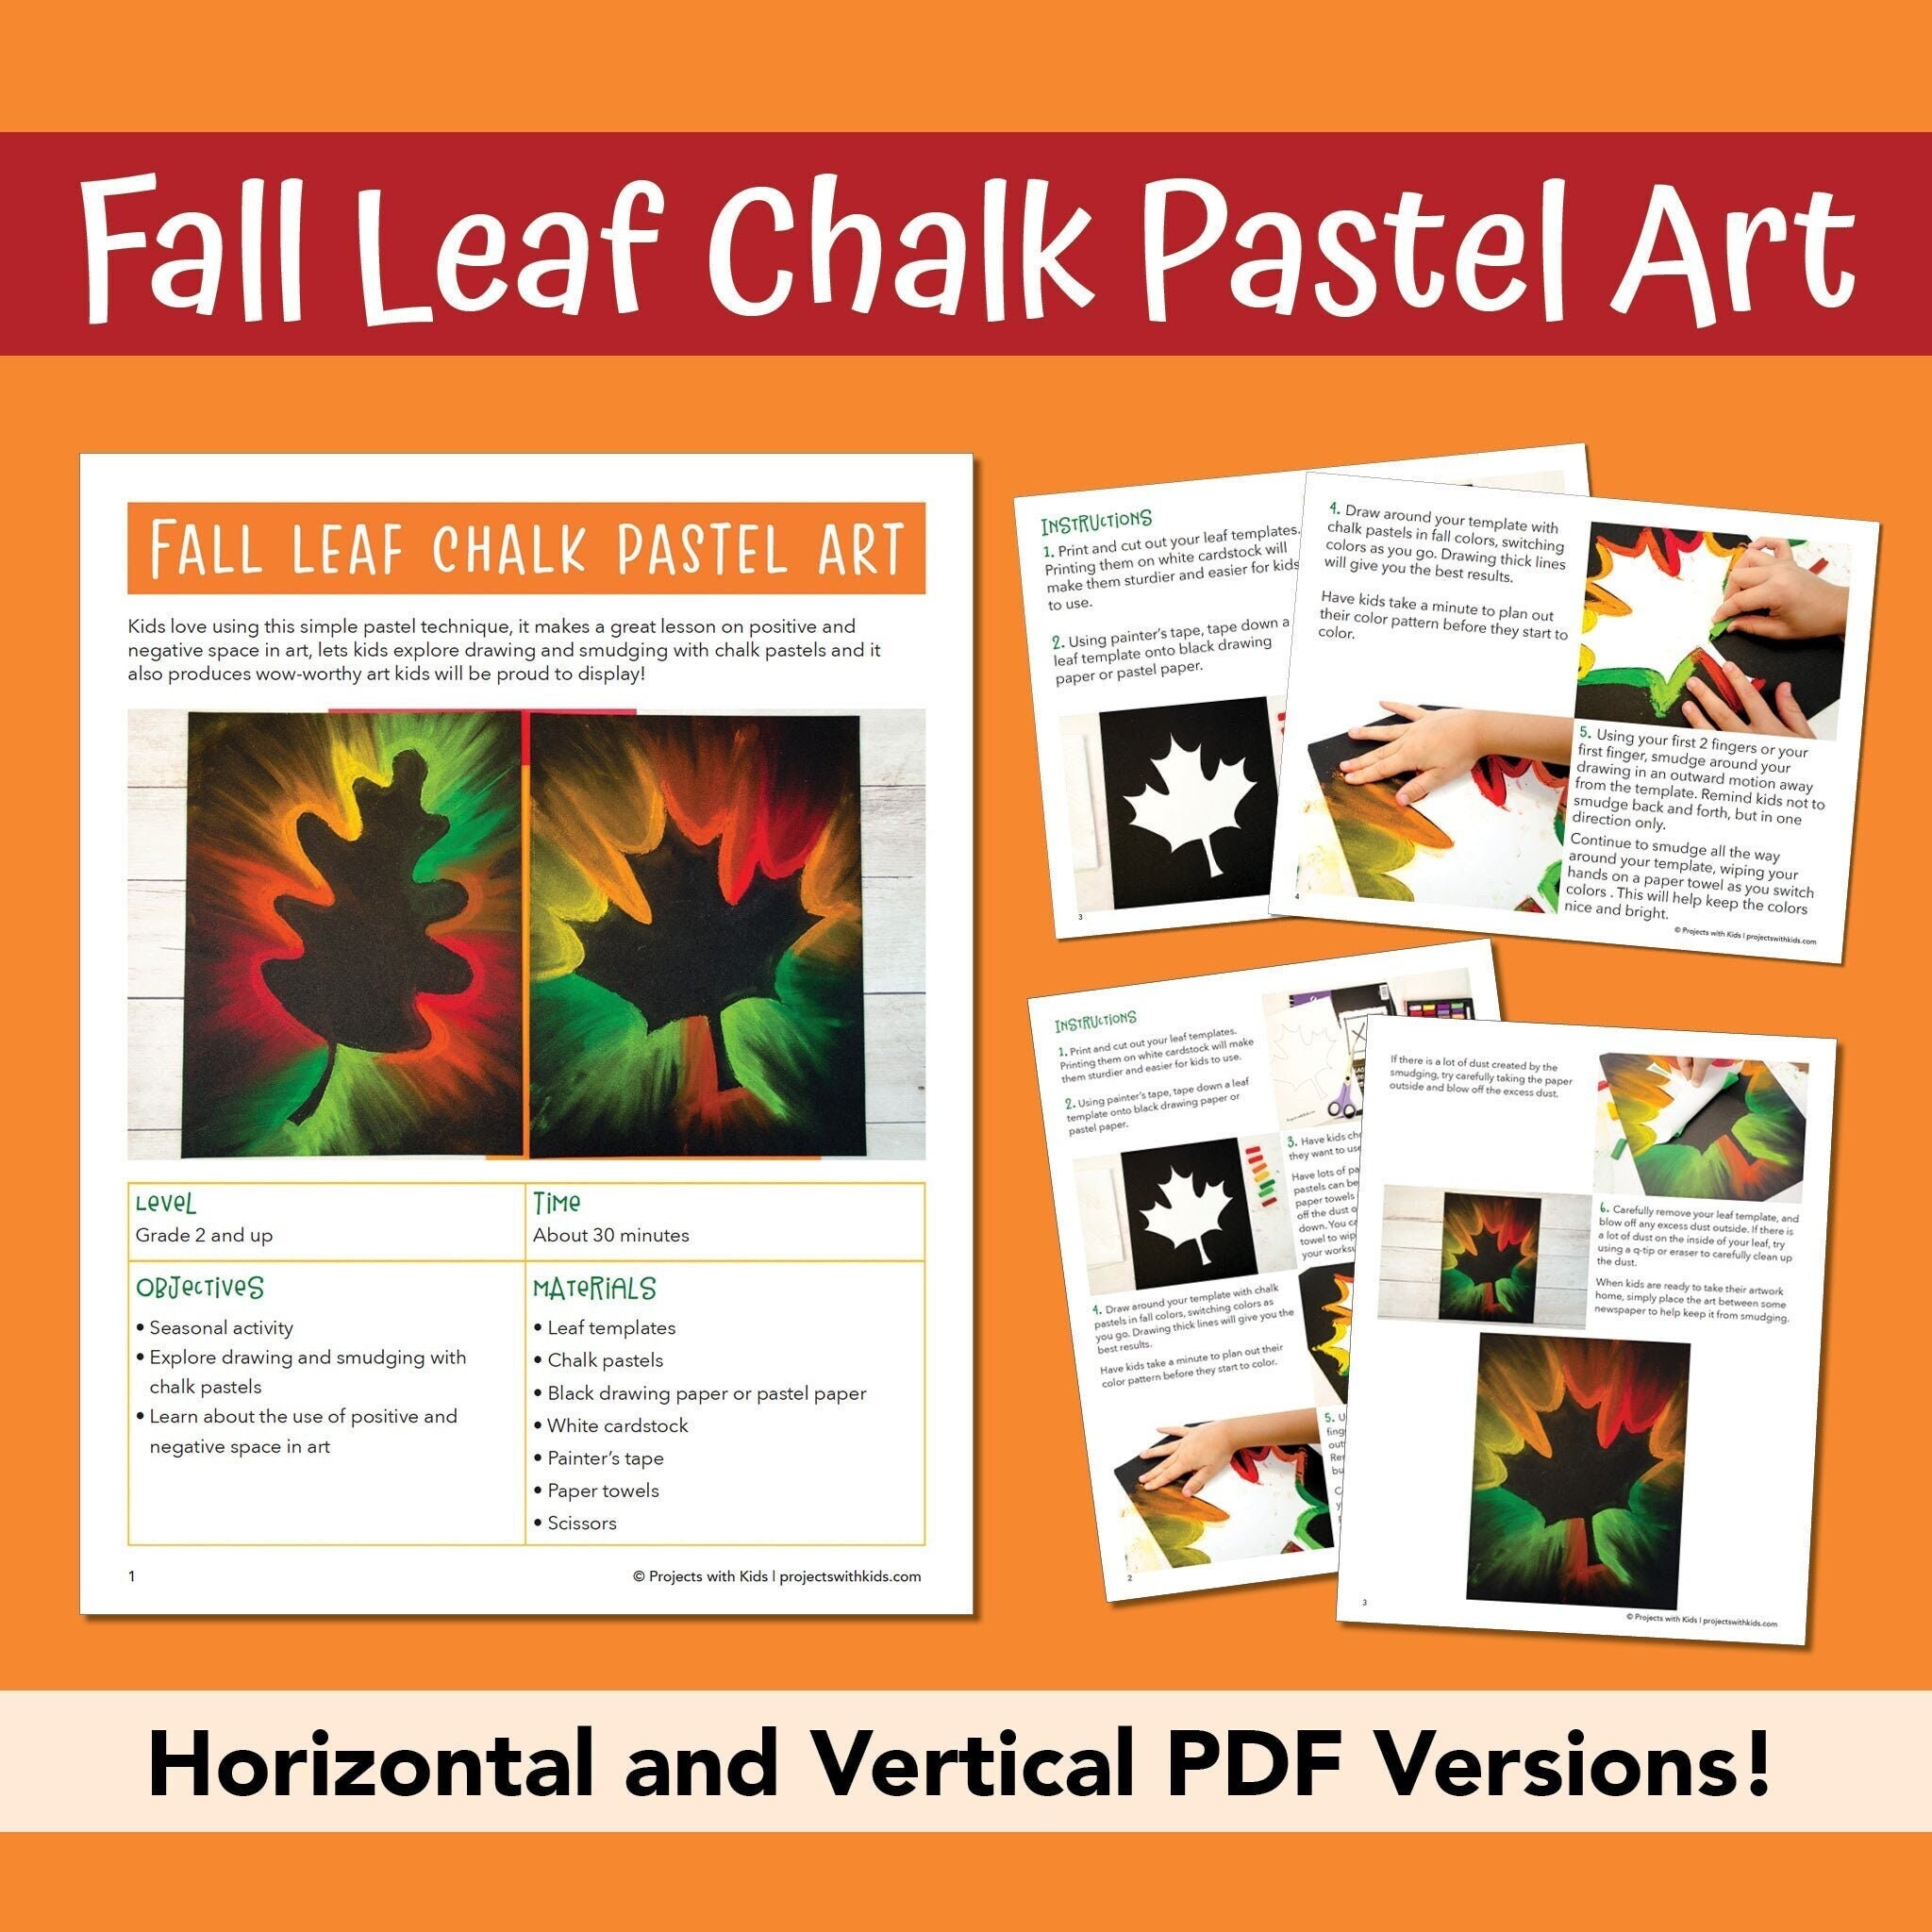 Soft Chalk Pastels: Storage and Cleaning - Your BEST Homeschool